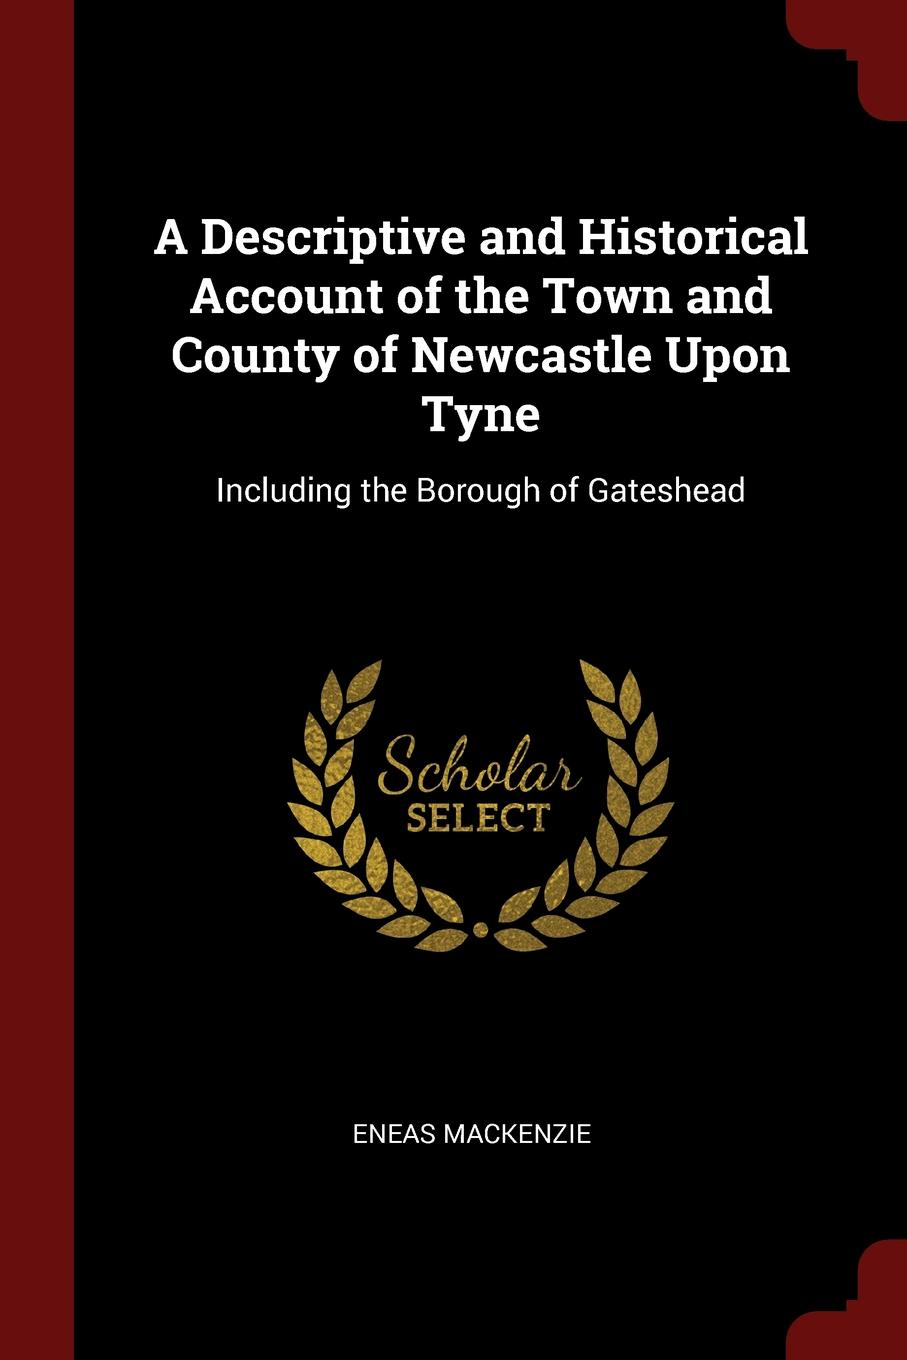 A Descriptive and Historical Account of the Town and County of Newcastle Upon Tyne. Including the Borough of Gateshead